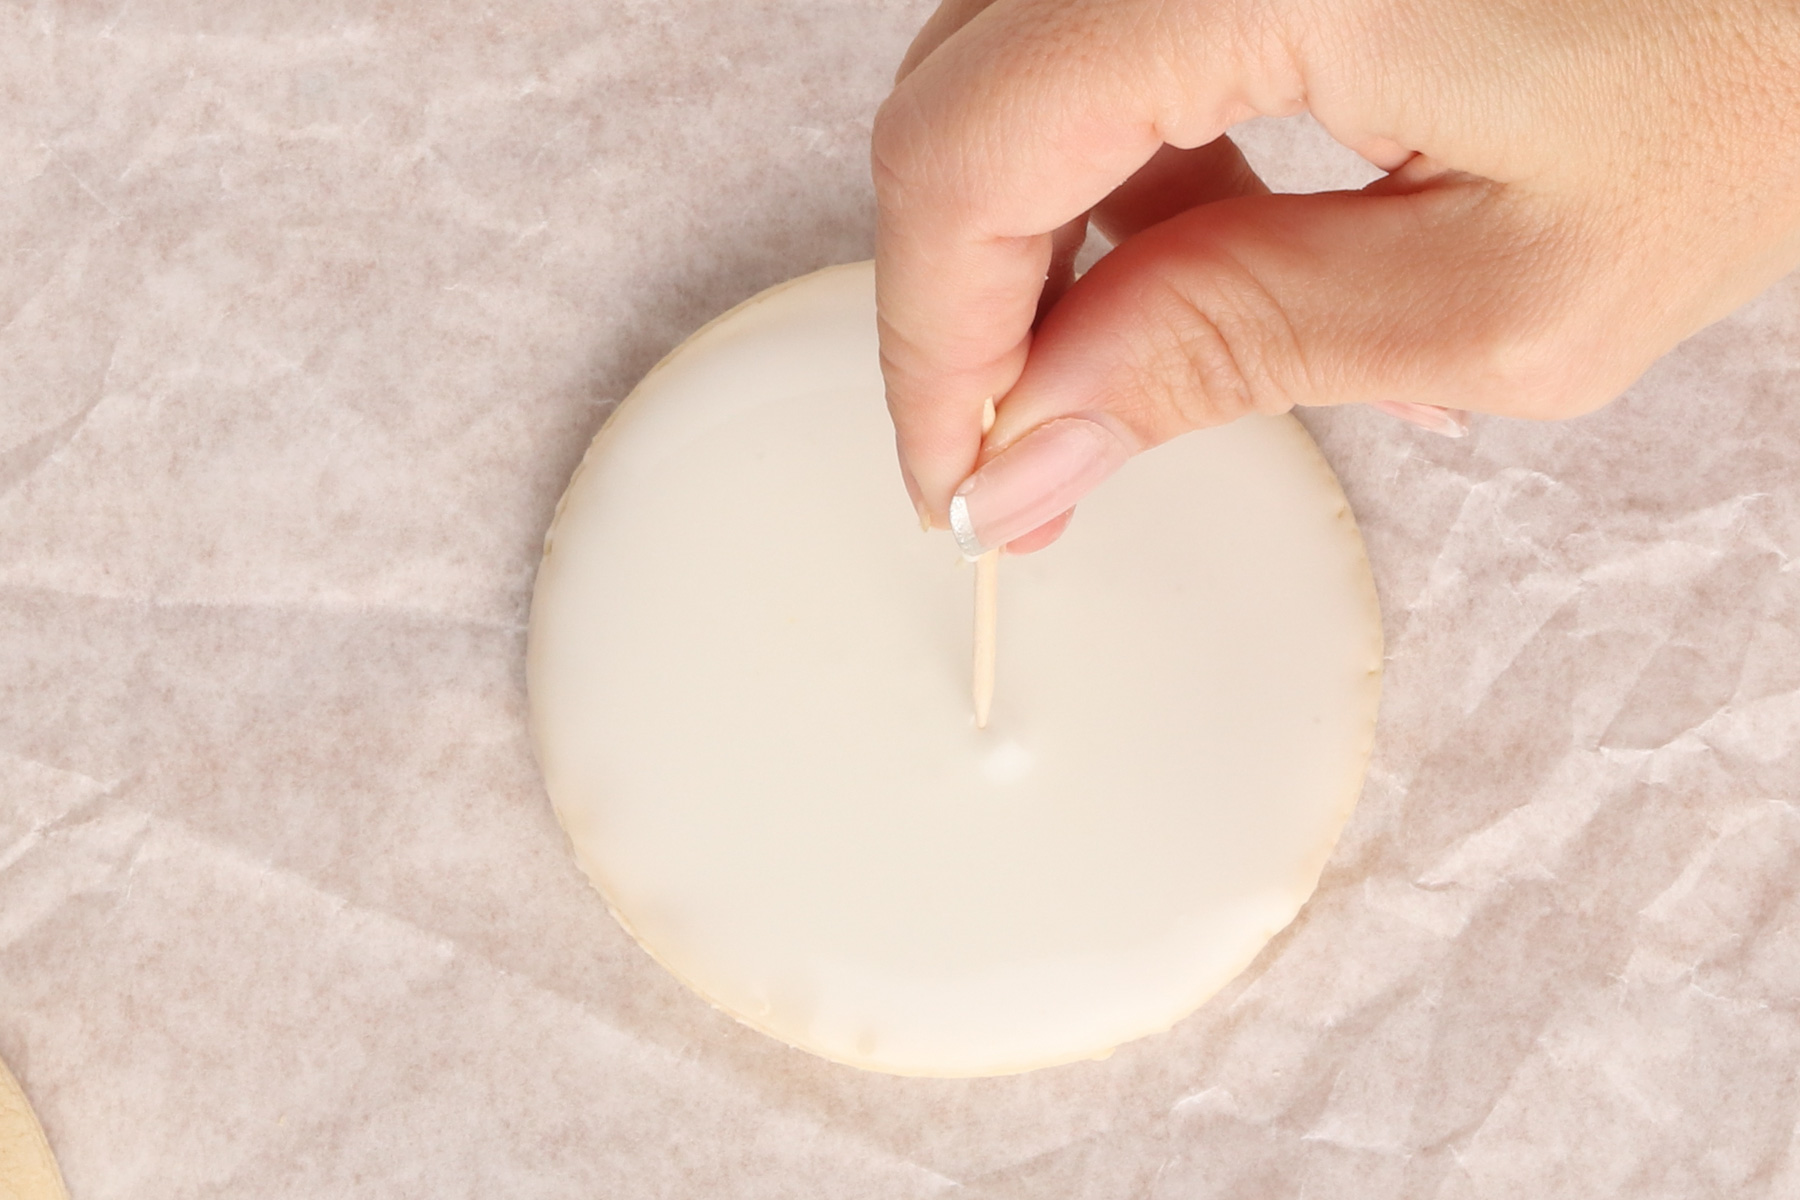 Step 5: Paint Your Own Cookies. Use a toothpick to pop any bubbles.